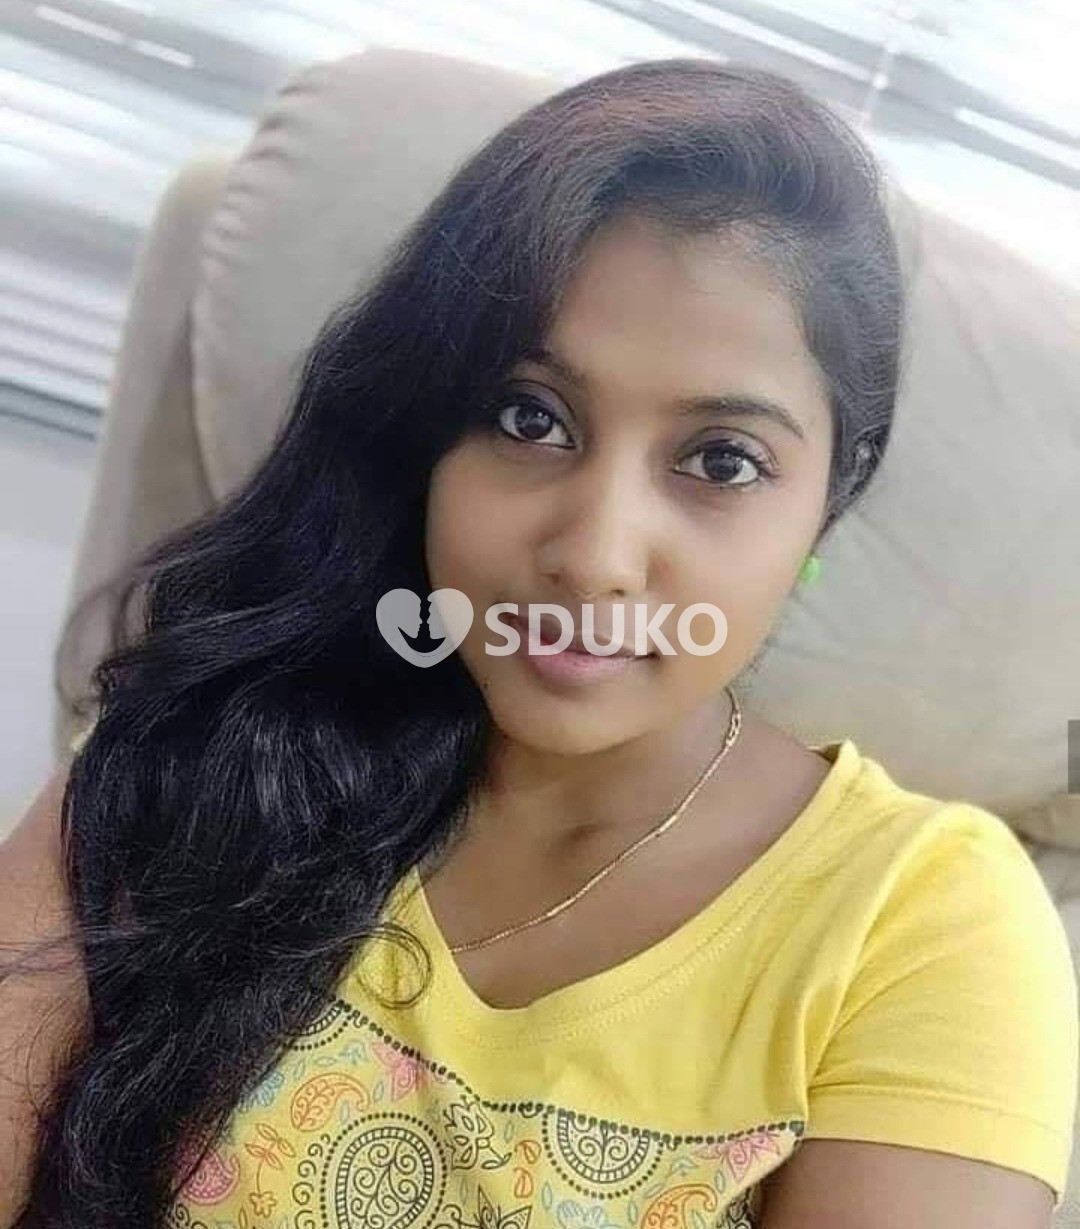 Pondicherry❤️𝗦𝗘𝗫❣️100% SAFE AND SECURE TODAY LOW PRICE UNLIMITED ENJOY HOT COLLEGE GIRLS AVAILABLE